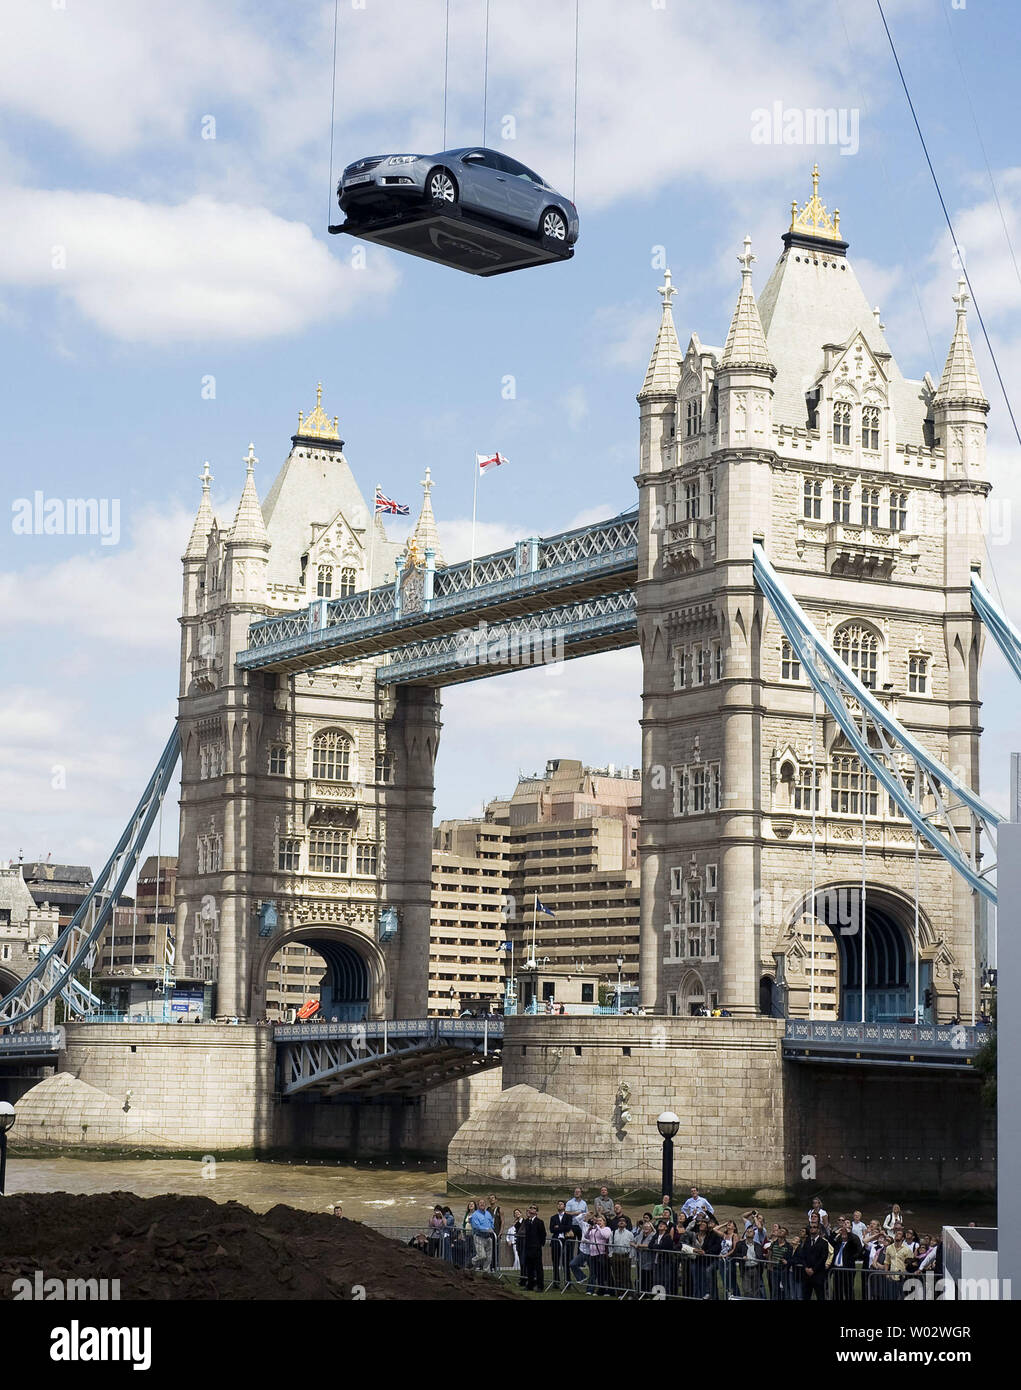 Ouderling samen Of anders The new Opel/Vauxhall Insignia drops twelve stories from a crane above  Tower Bridge at Potters Field in London, England during its world debut,  July 21, 2008. The Insignia will be available in